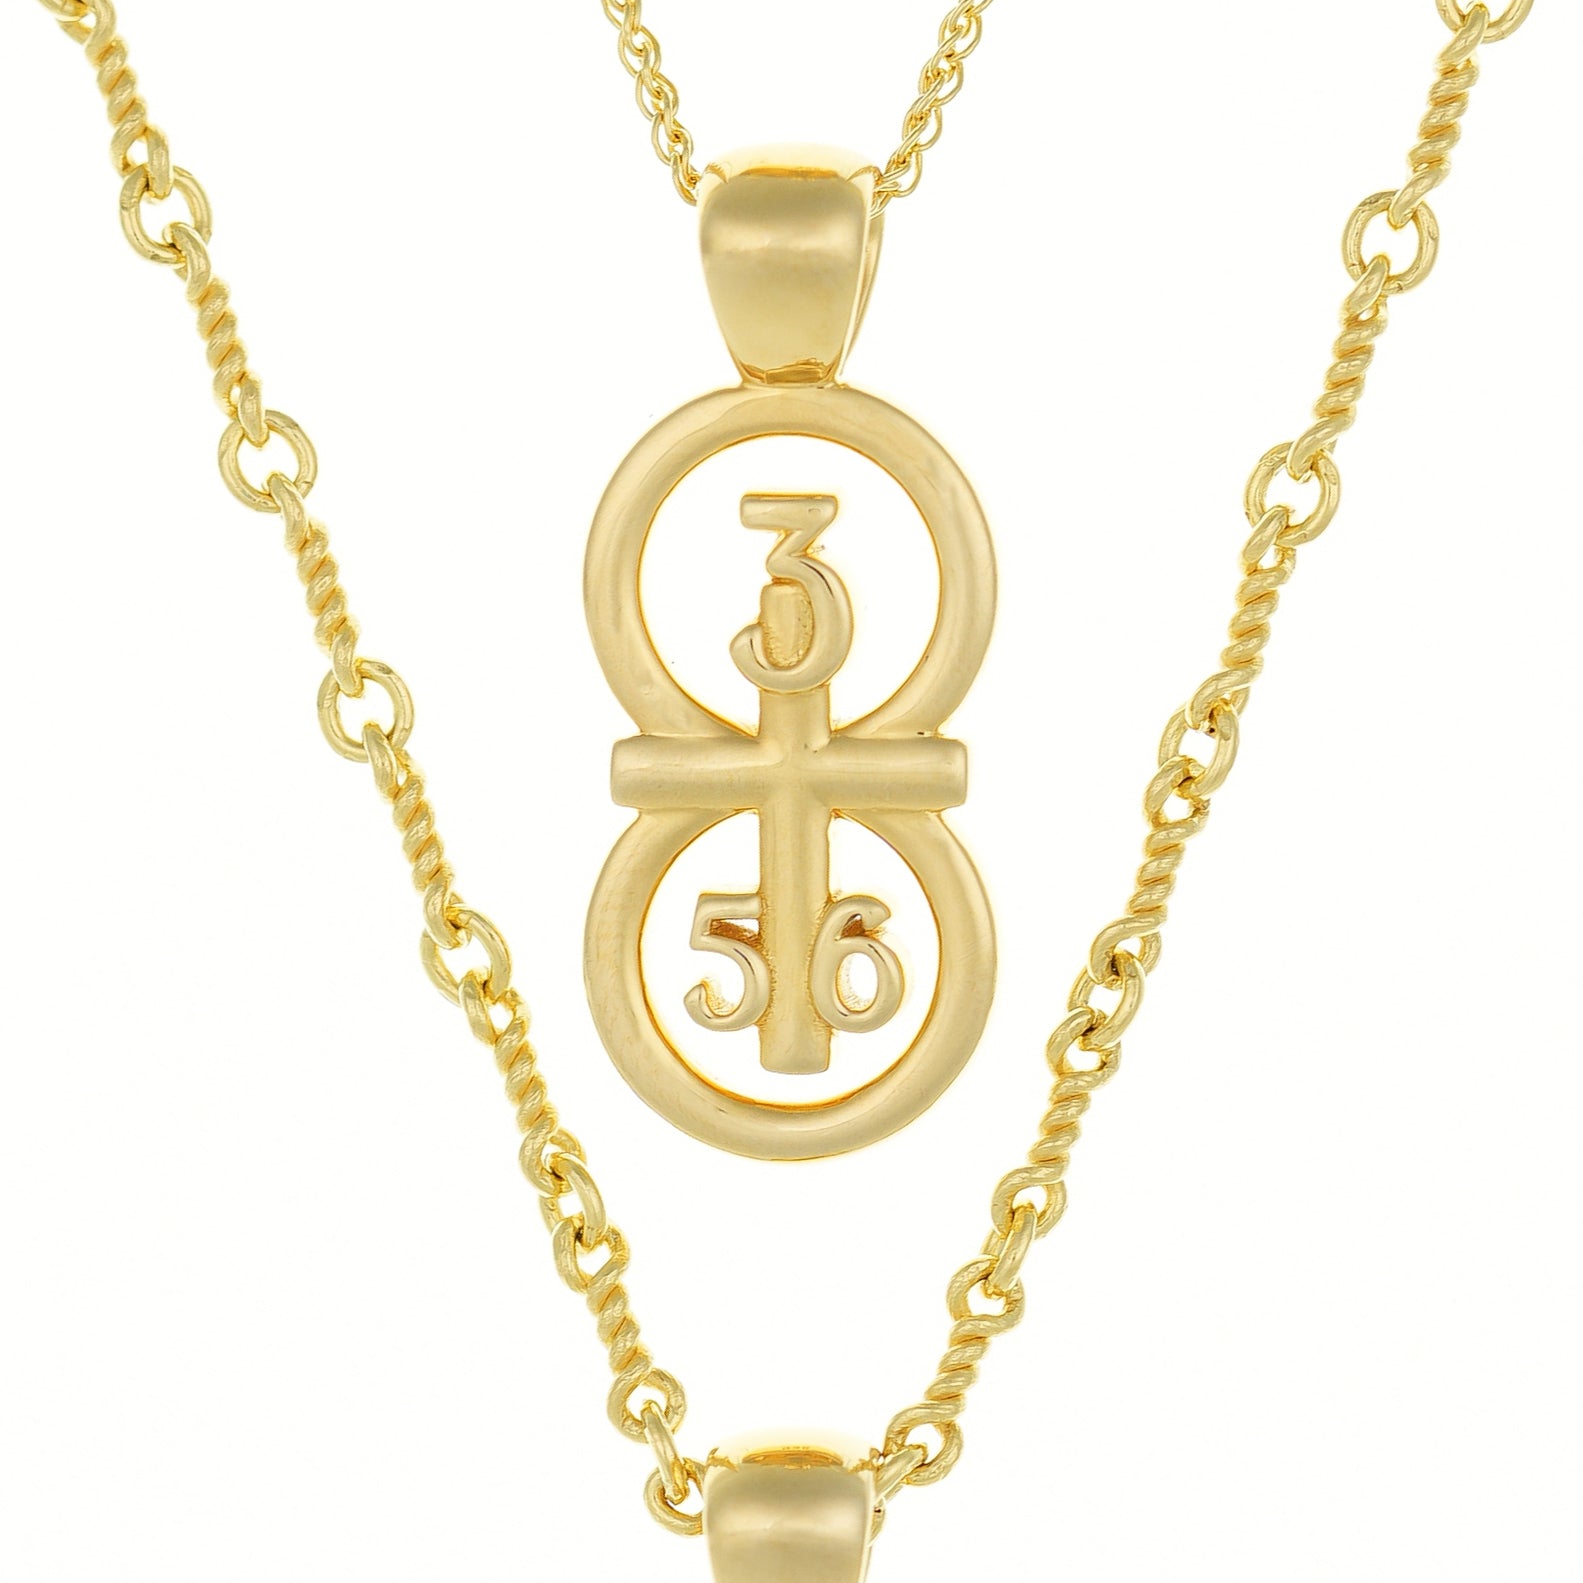 This picture displays our large pendant on our 14k gold filled satellite chain.  Our RIYAN 29 and 11® pendant has the numbers 3, 5, and 6 intertwined with the cross to represent Proverbs 3:5-6 with the chapter word "Proverbs" inscribed on the back.